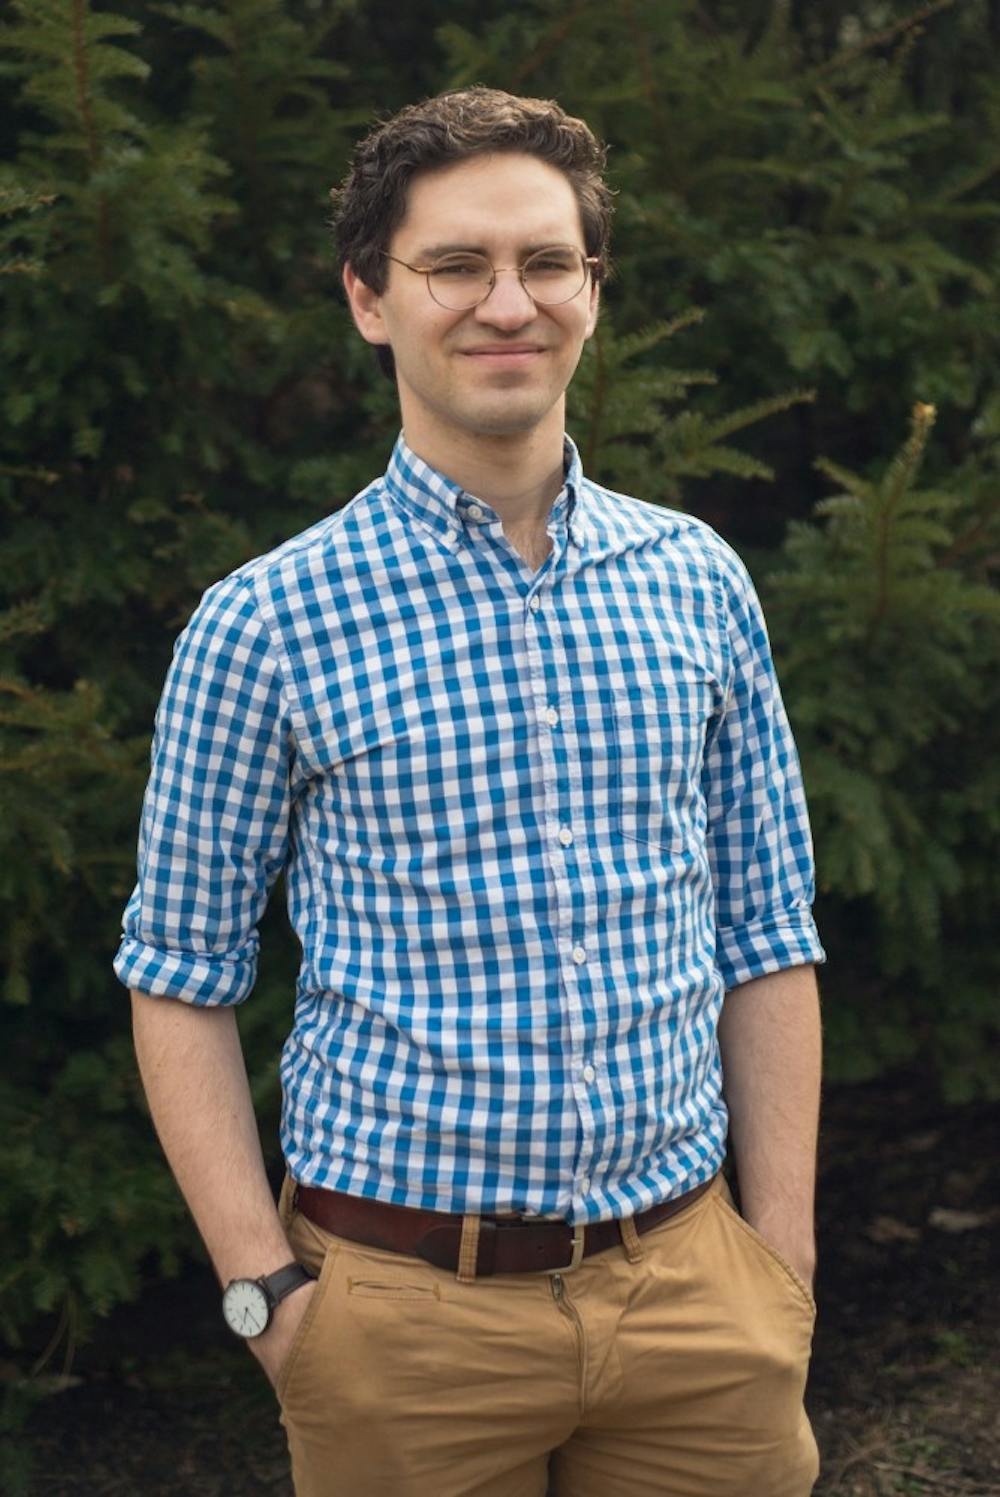 <p>Michael Montoro is elected as the UB council student representative for 2019-20 academic year.</p>